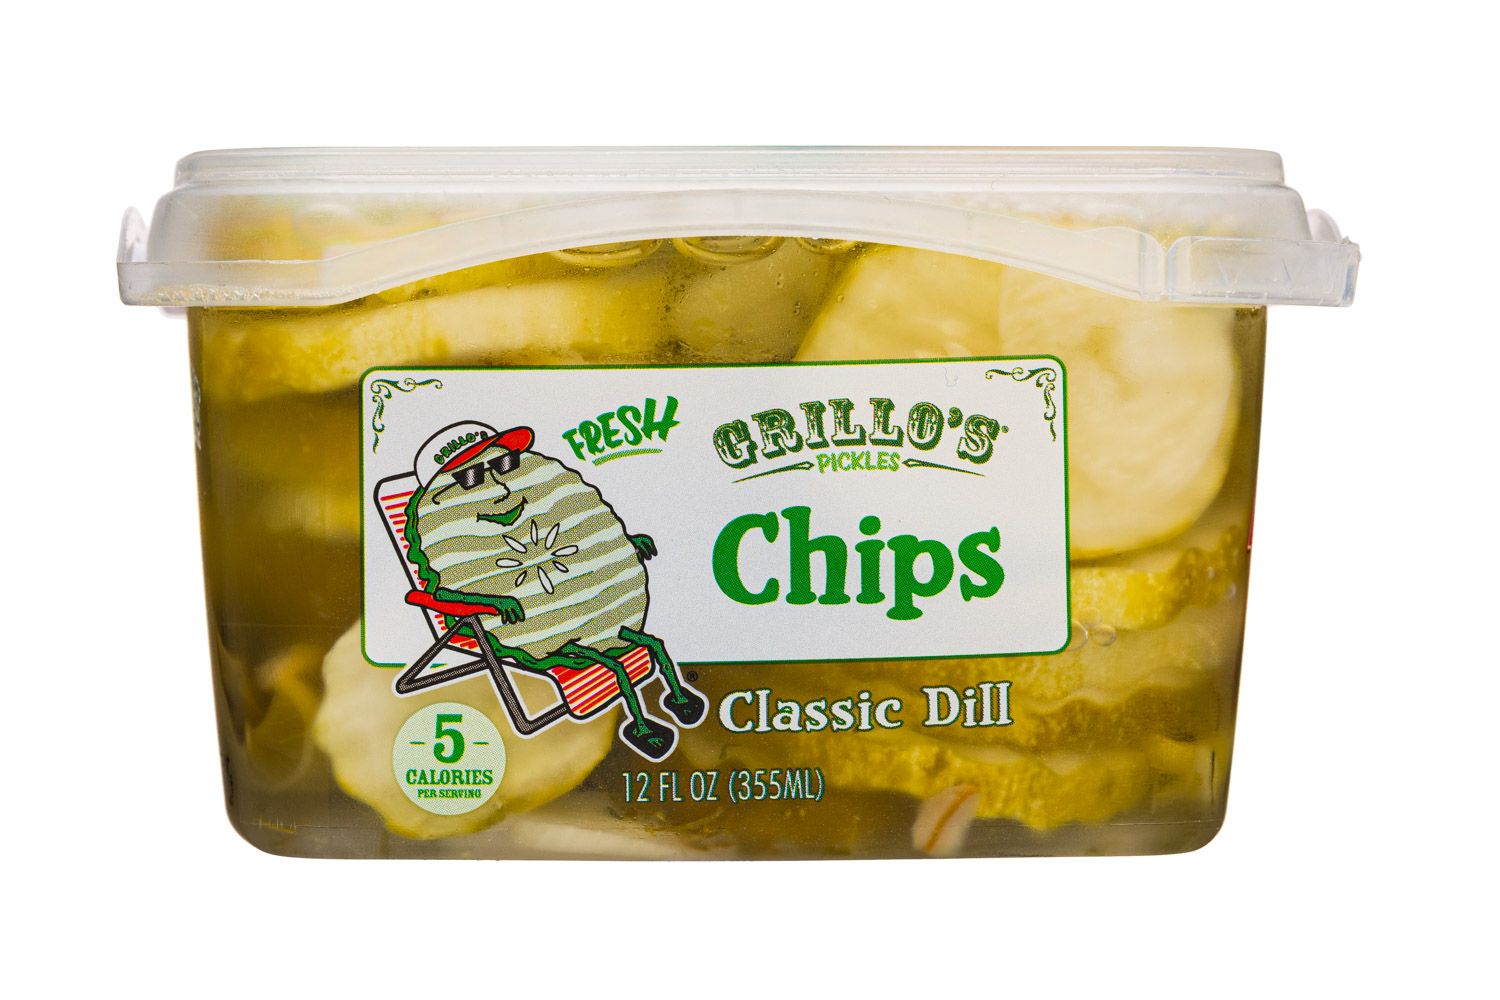 Classic Dill - Chips